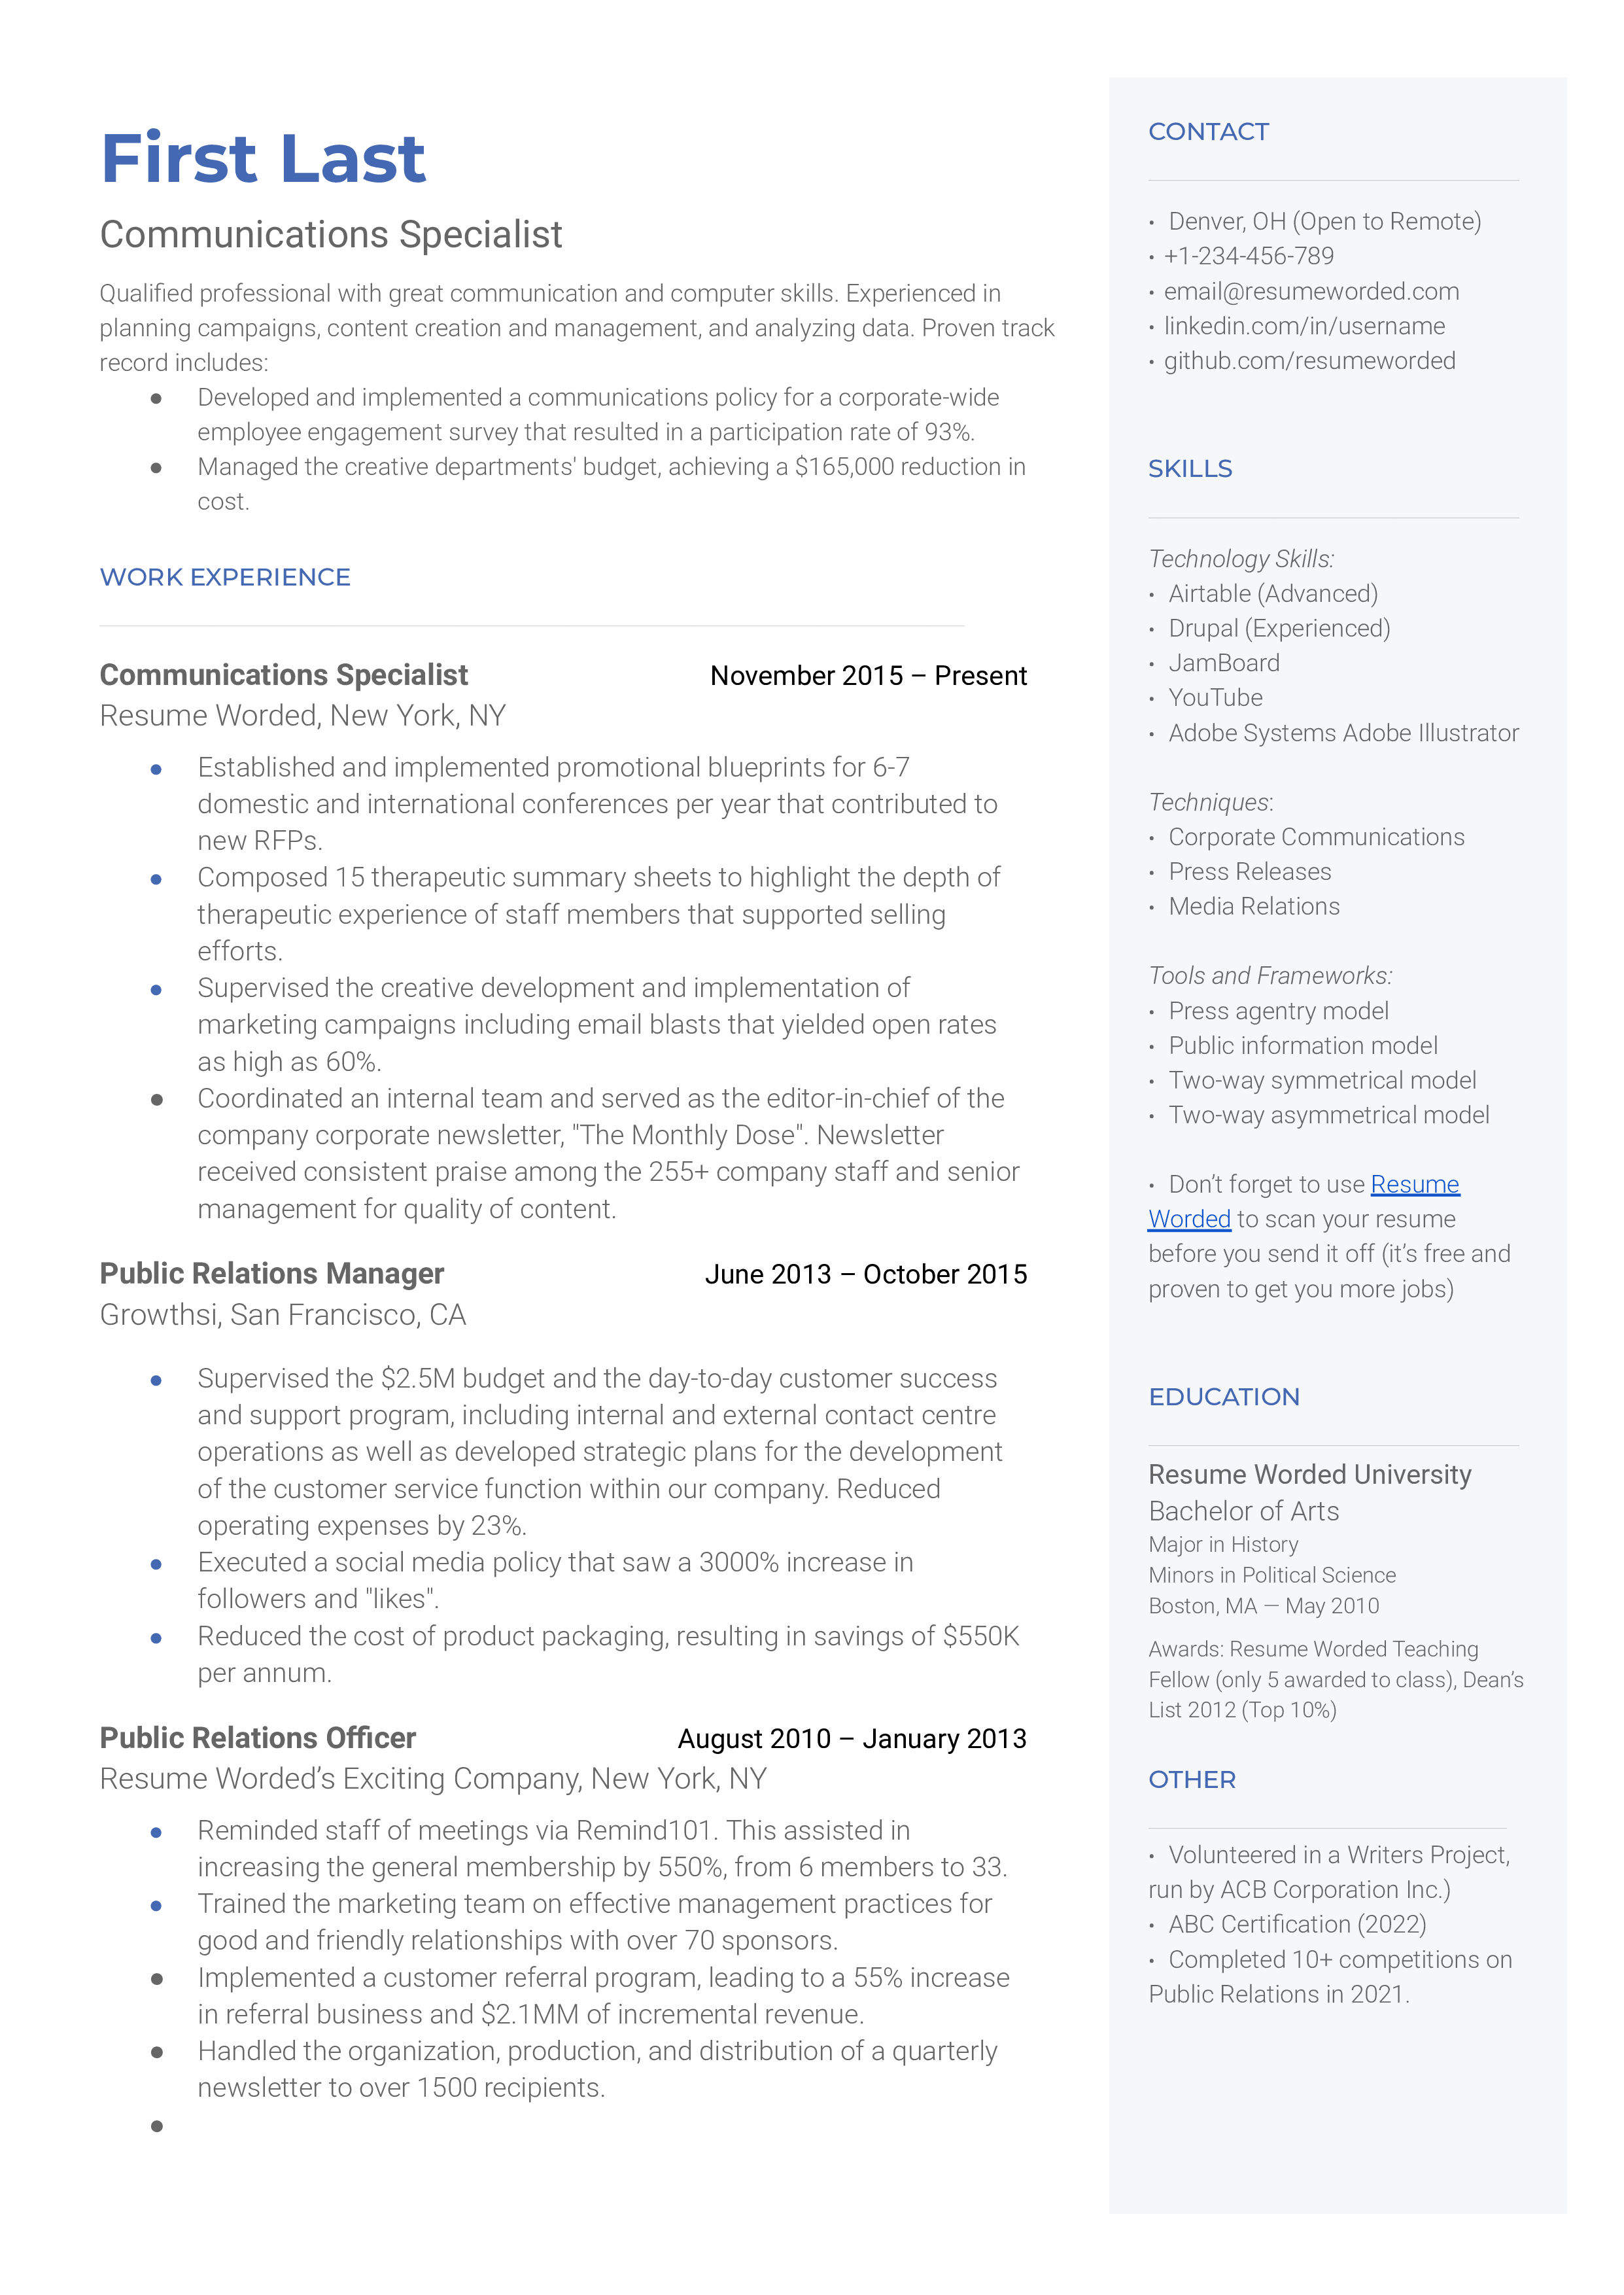 A Communications Specialist's CV showcasing digital proficiency and quantifiable results.